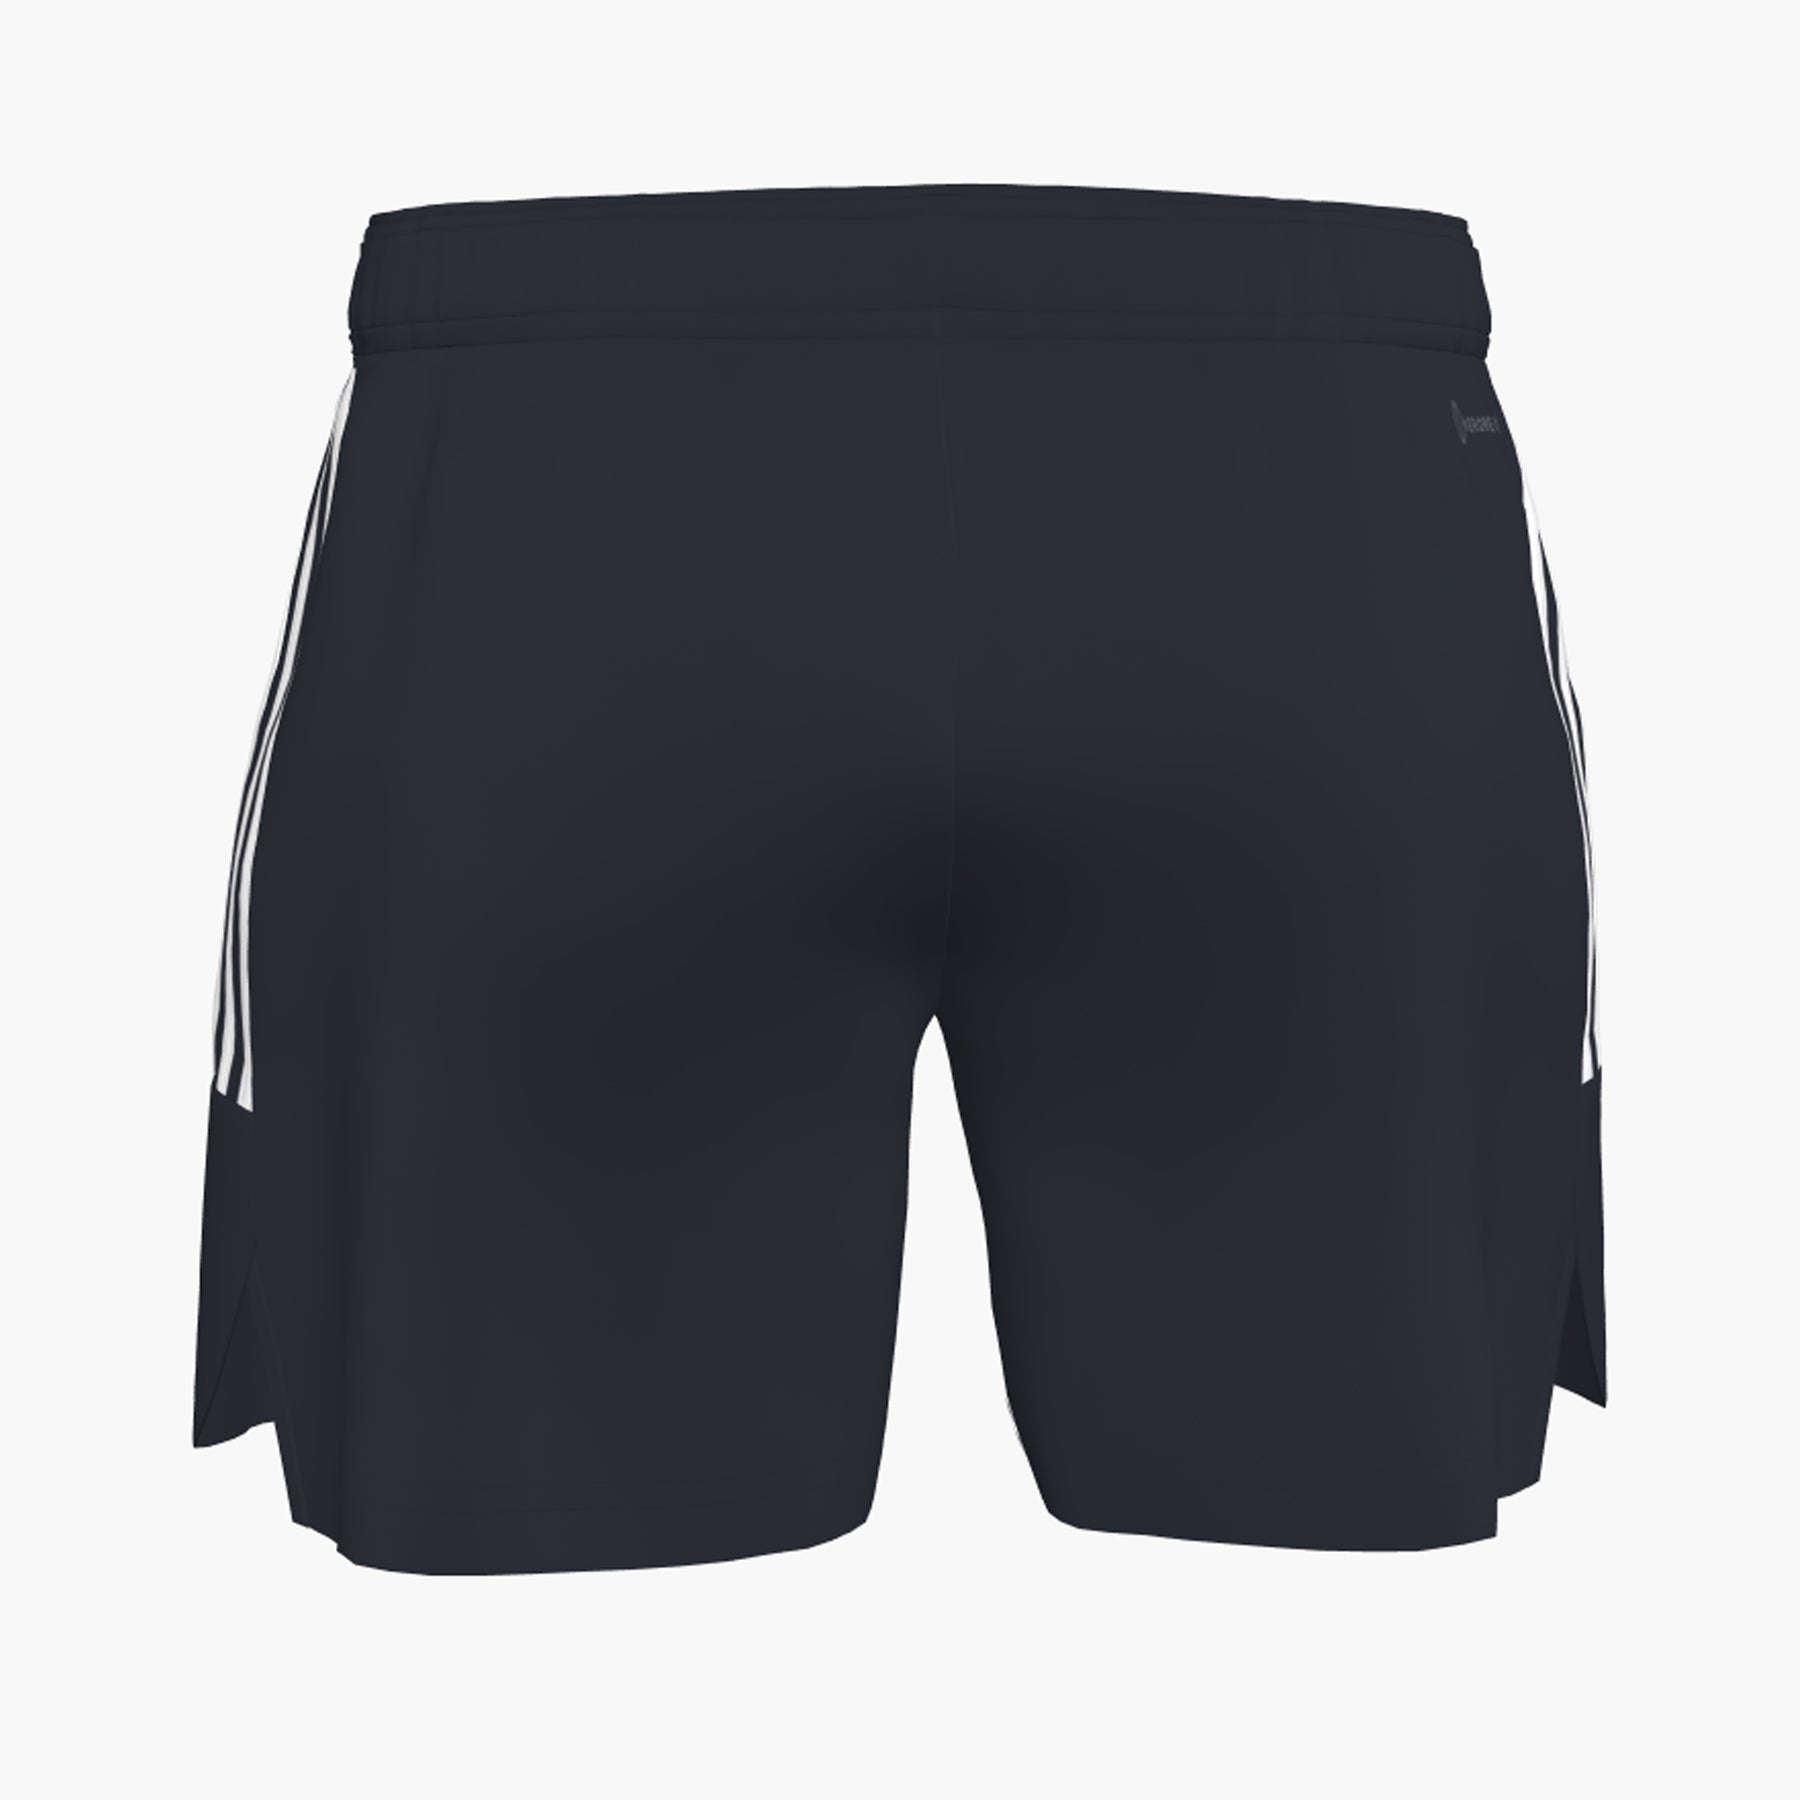 Hampstead and Westminster HC Women's Condivo Shorts